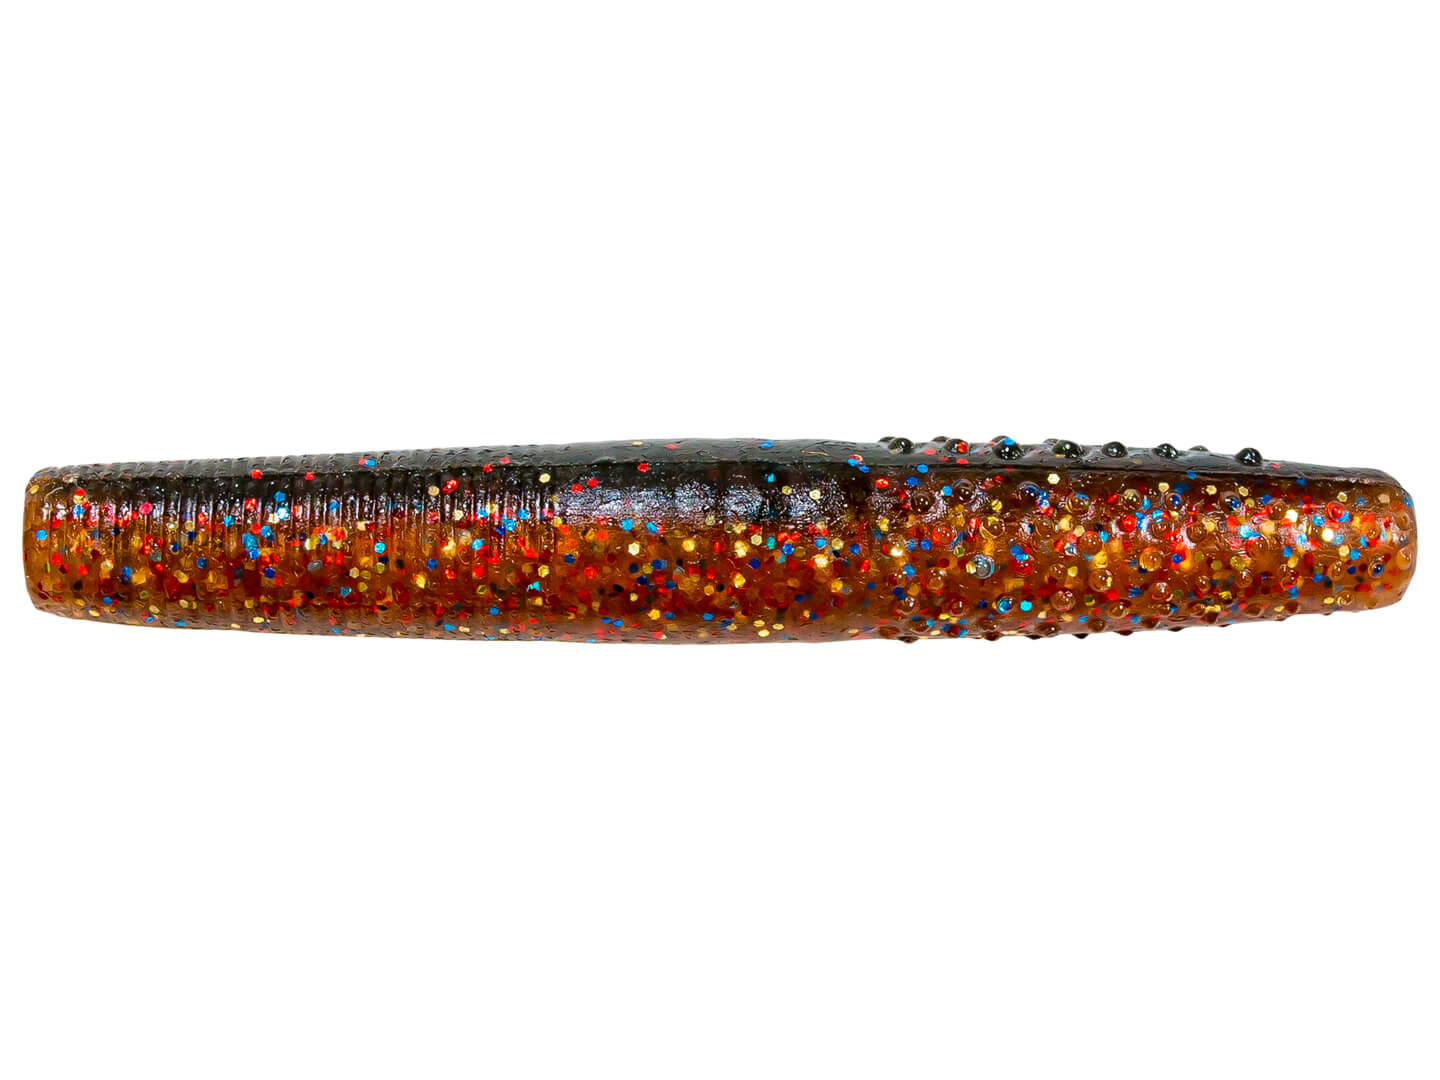 Z Man Finesse TRD - Molting Craw